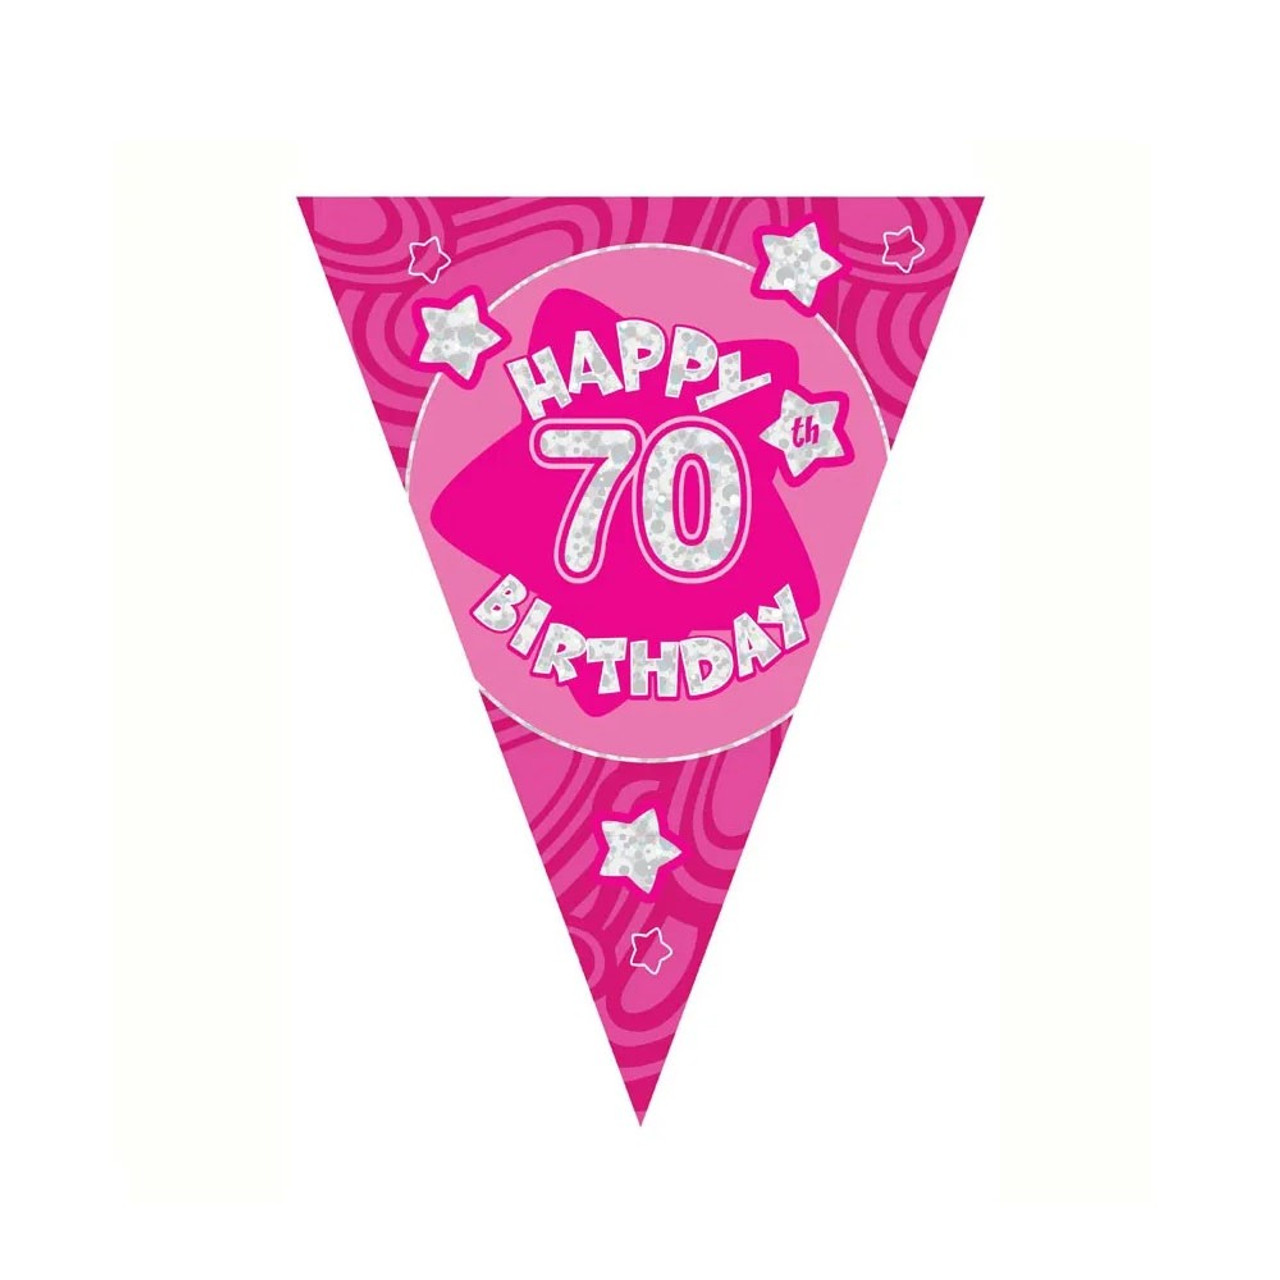 Apac Group Pink Holographic 70th Birthday Pink Bunting RRP 1.99 CLEARANCE XL 99p